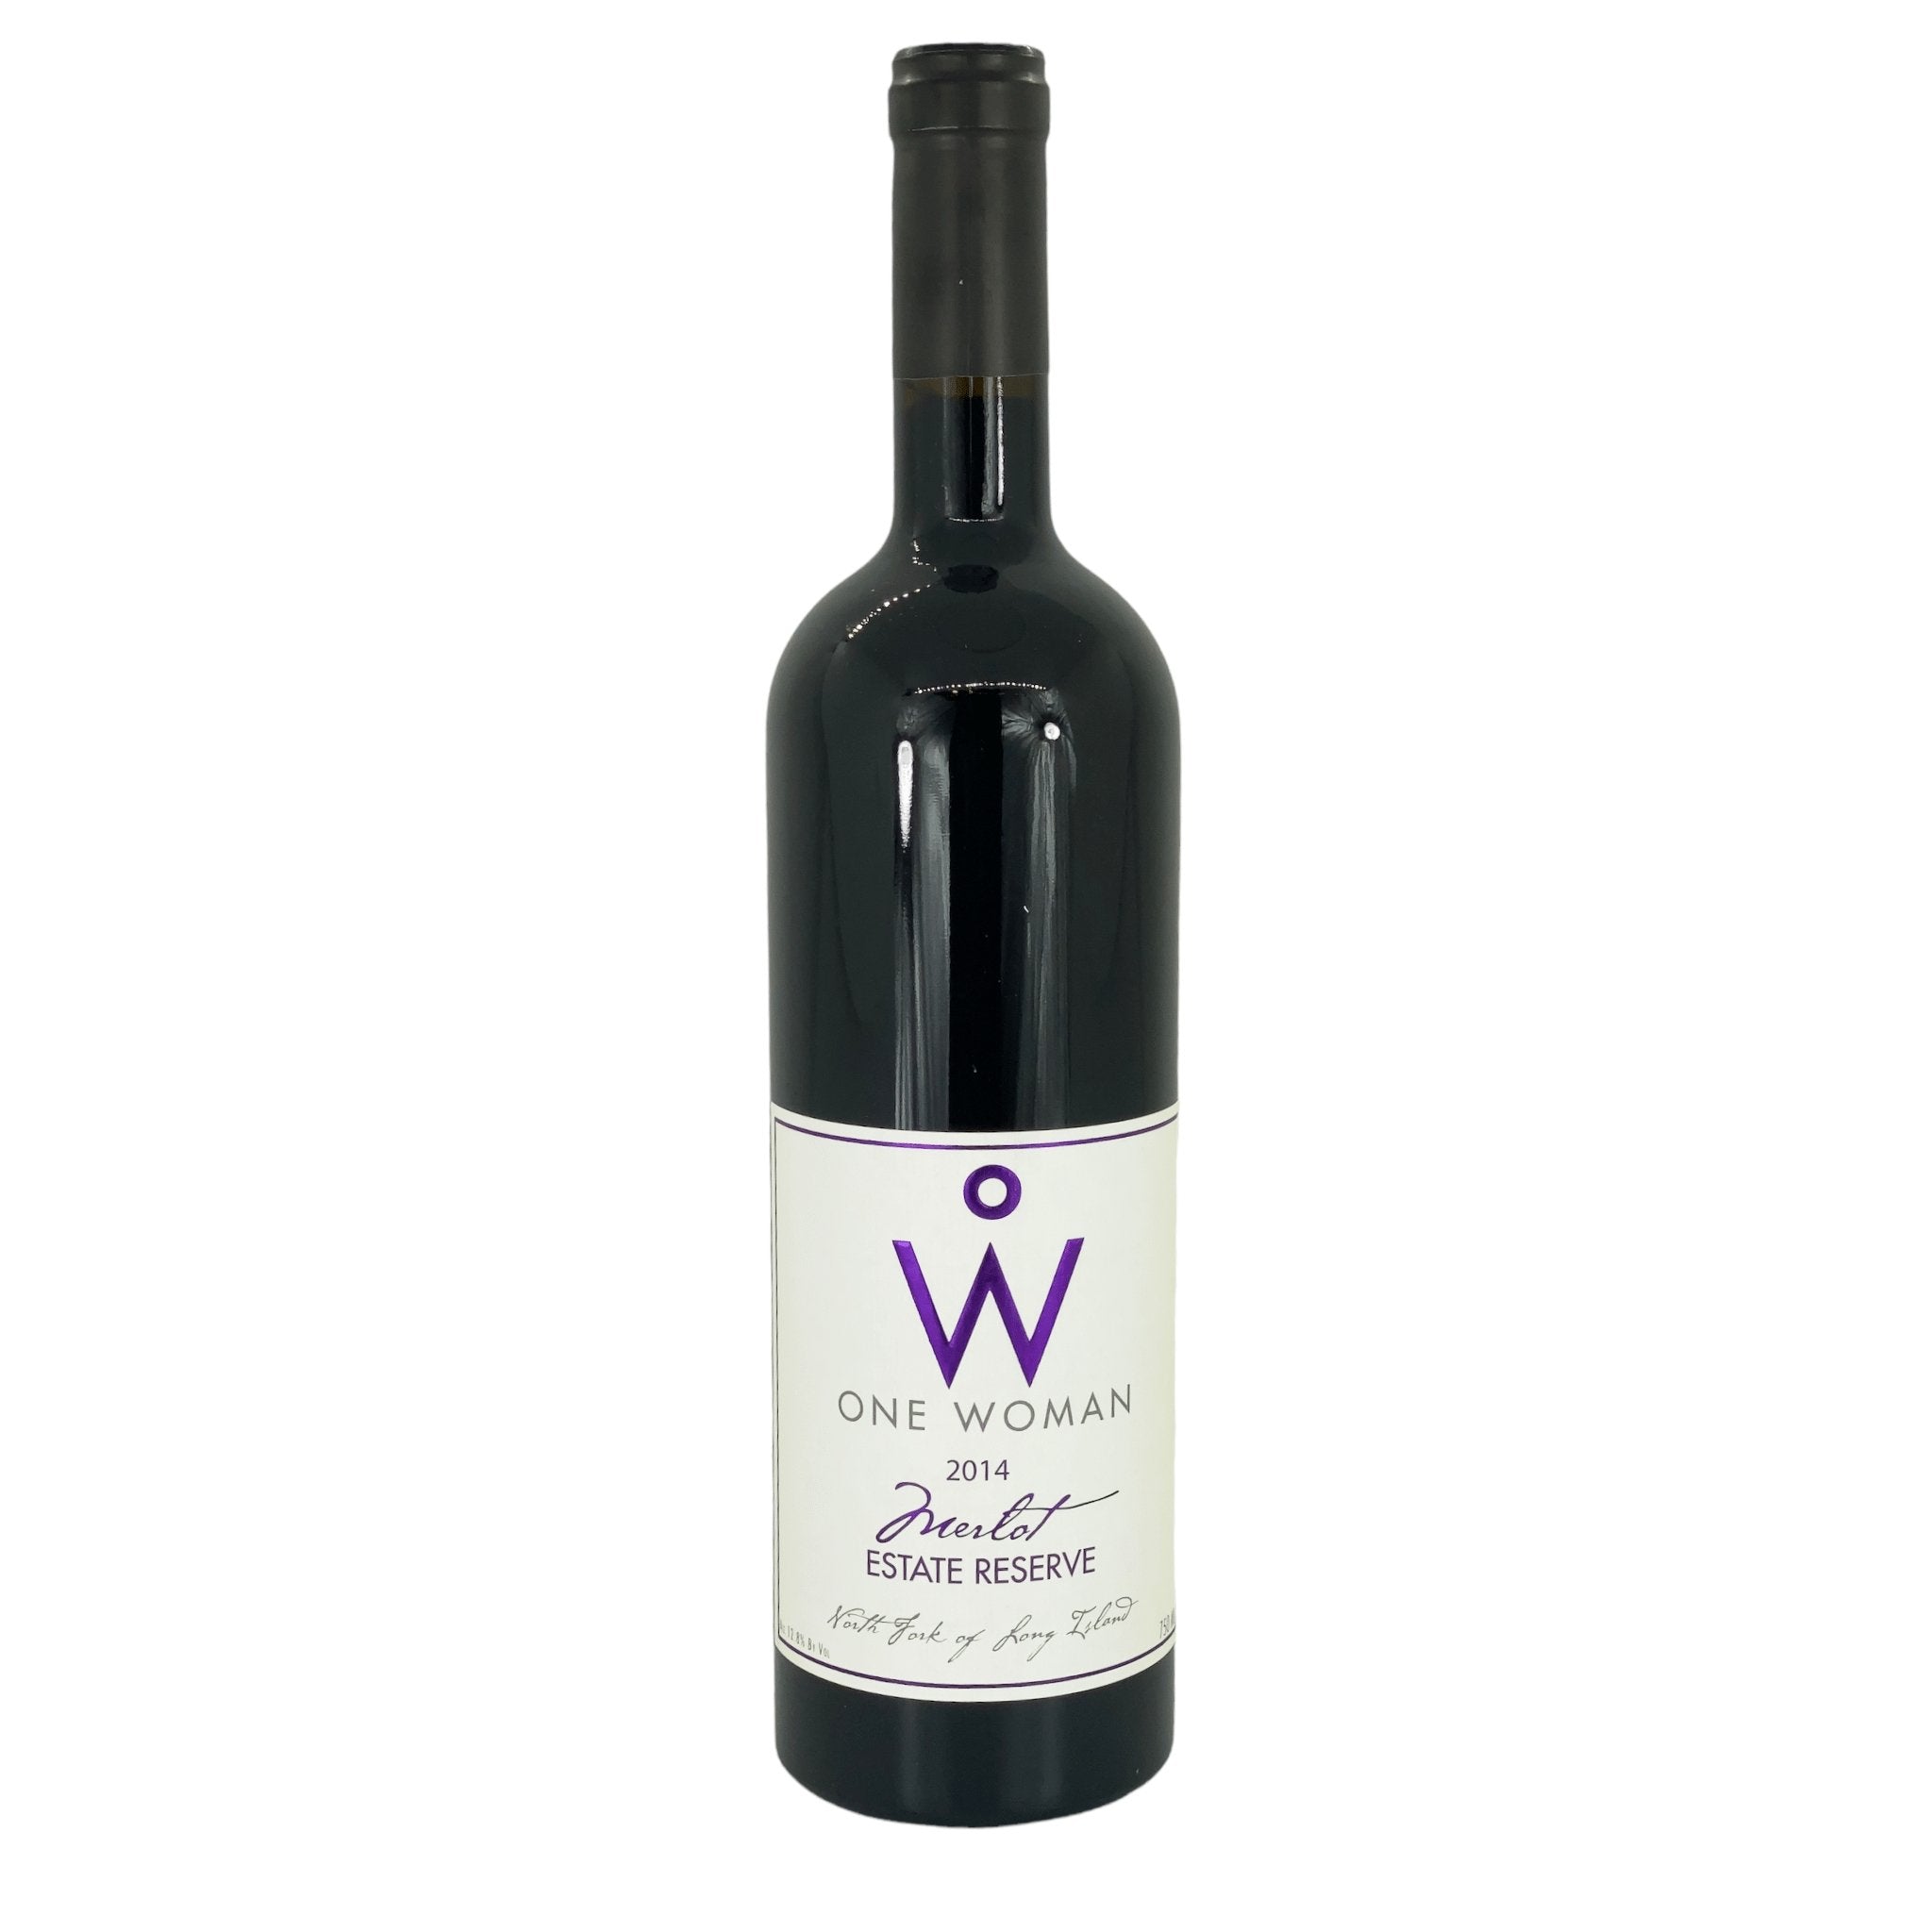 2013 One Woman Estate Reserve Merlot - One Woman Winery